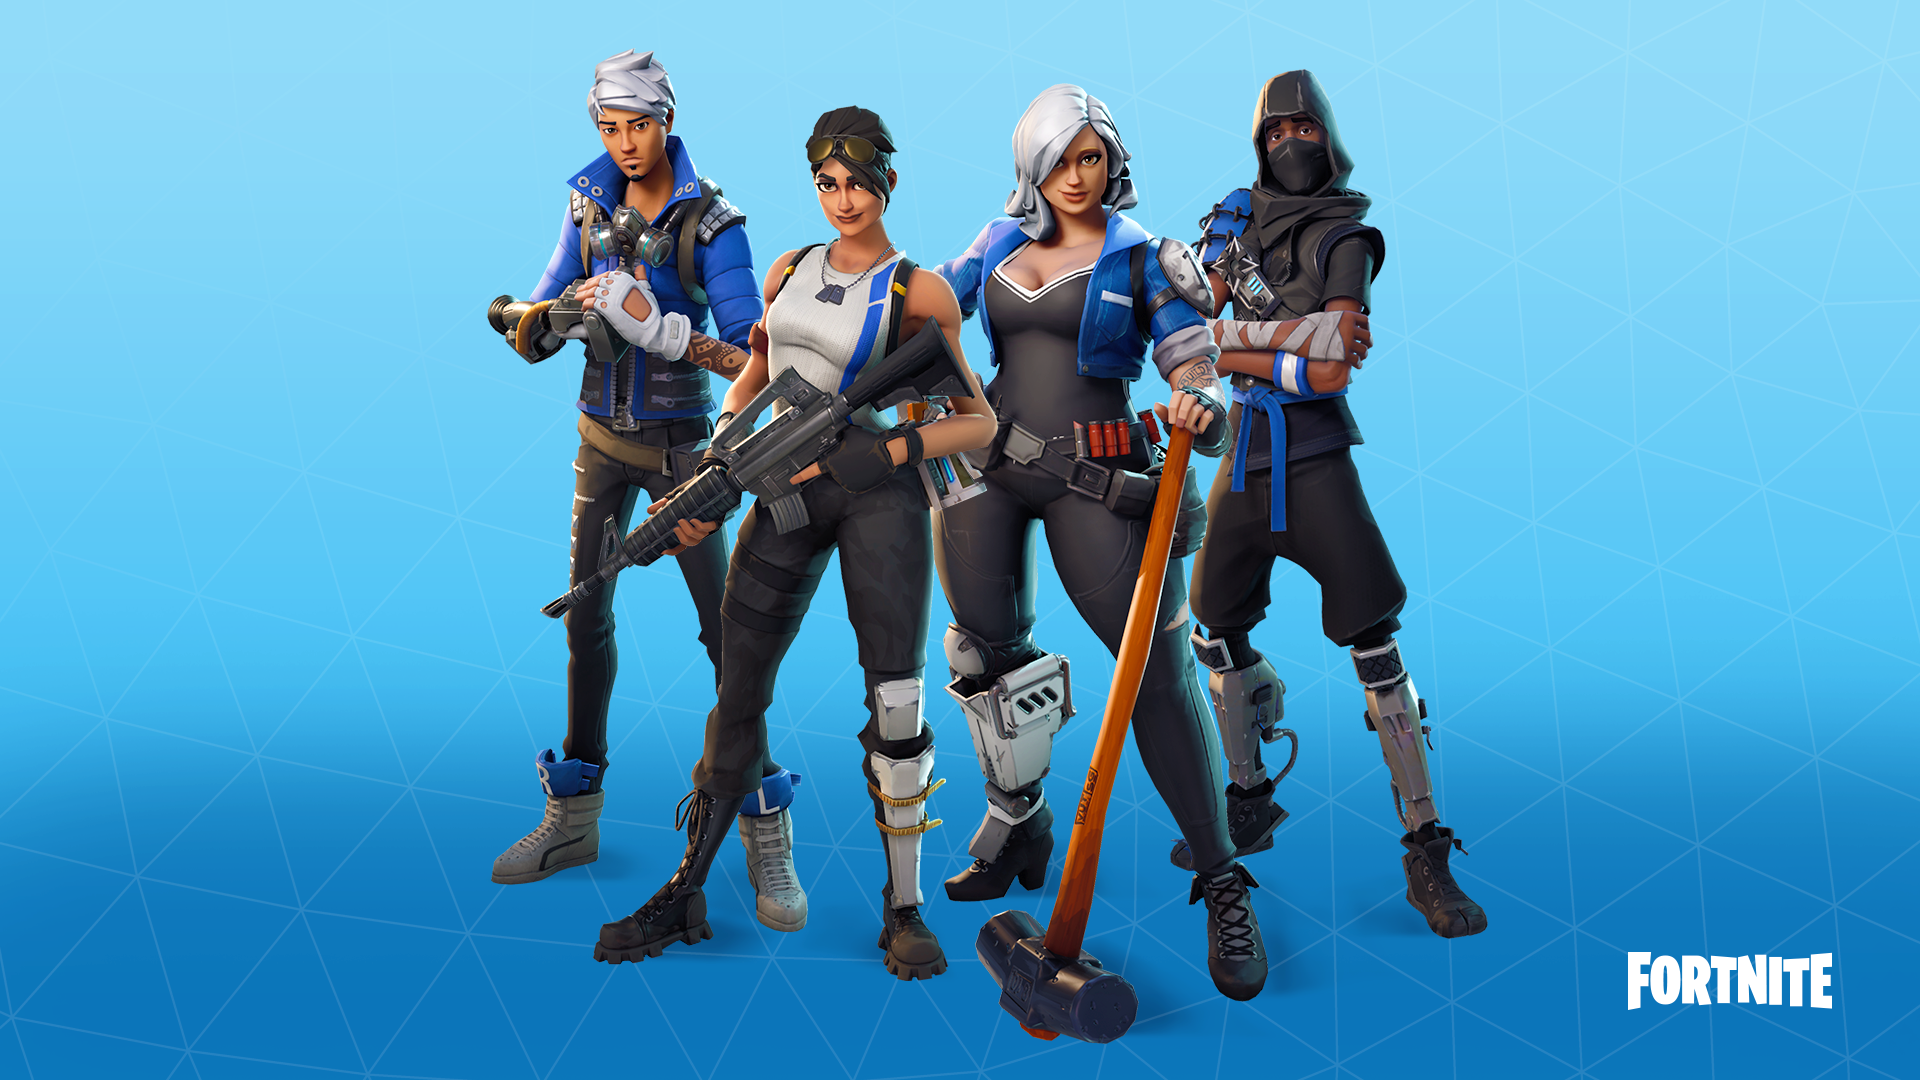 Playstation Players Can Now Get More Fortnite Items